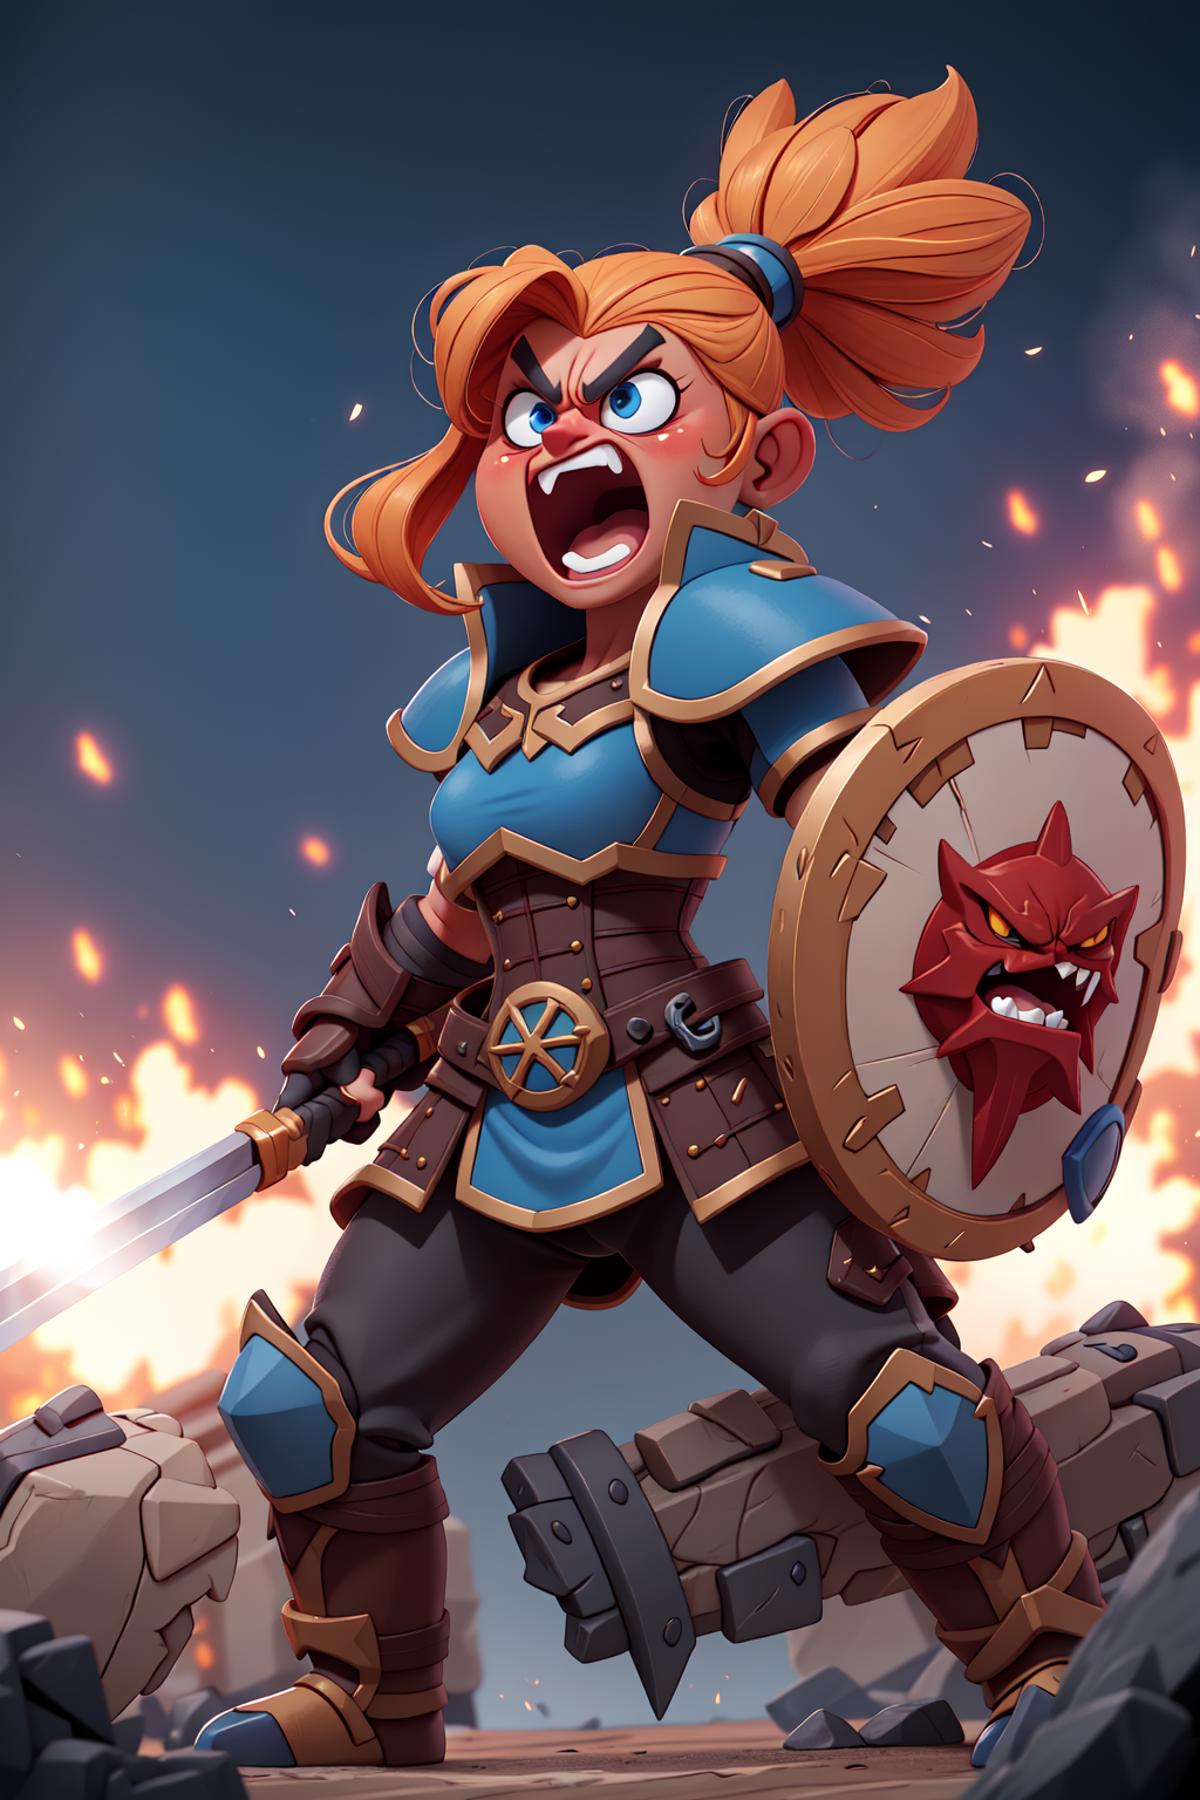 Angry Cartoon Warrior Woman with Blue Armor and Shield, Holding a Sword